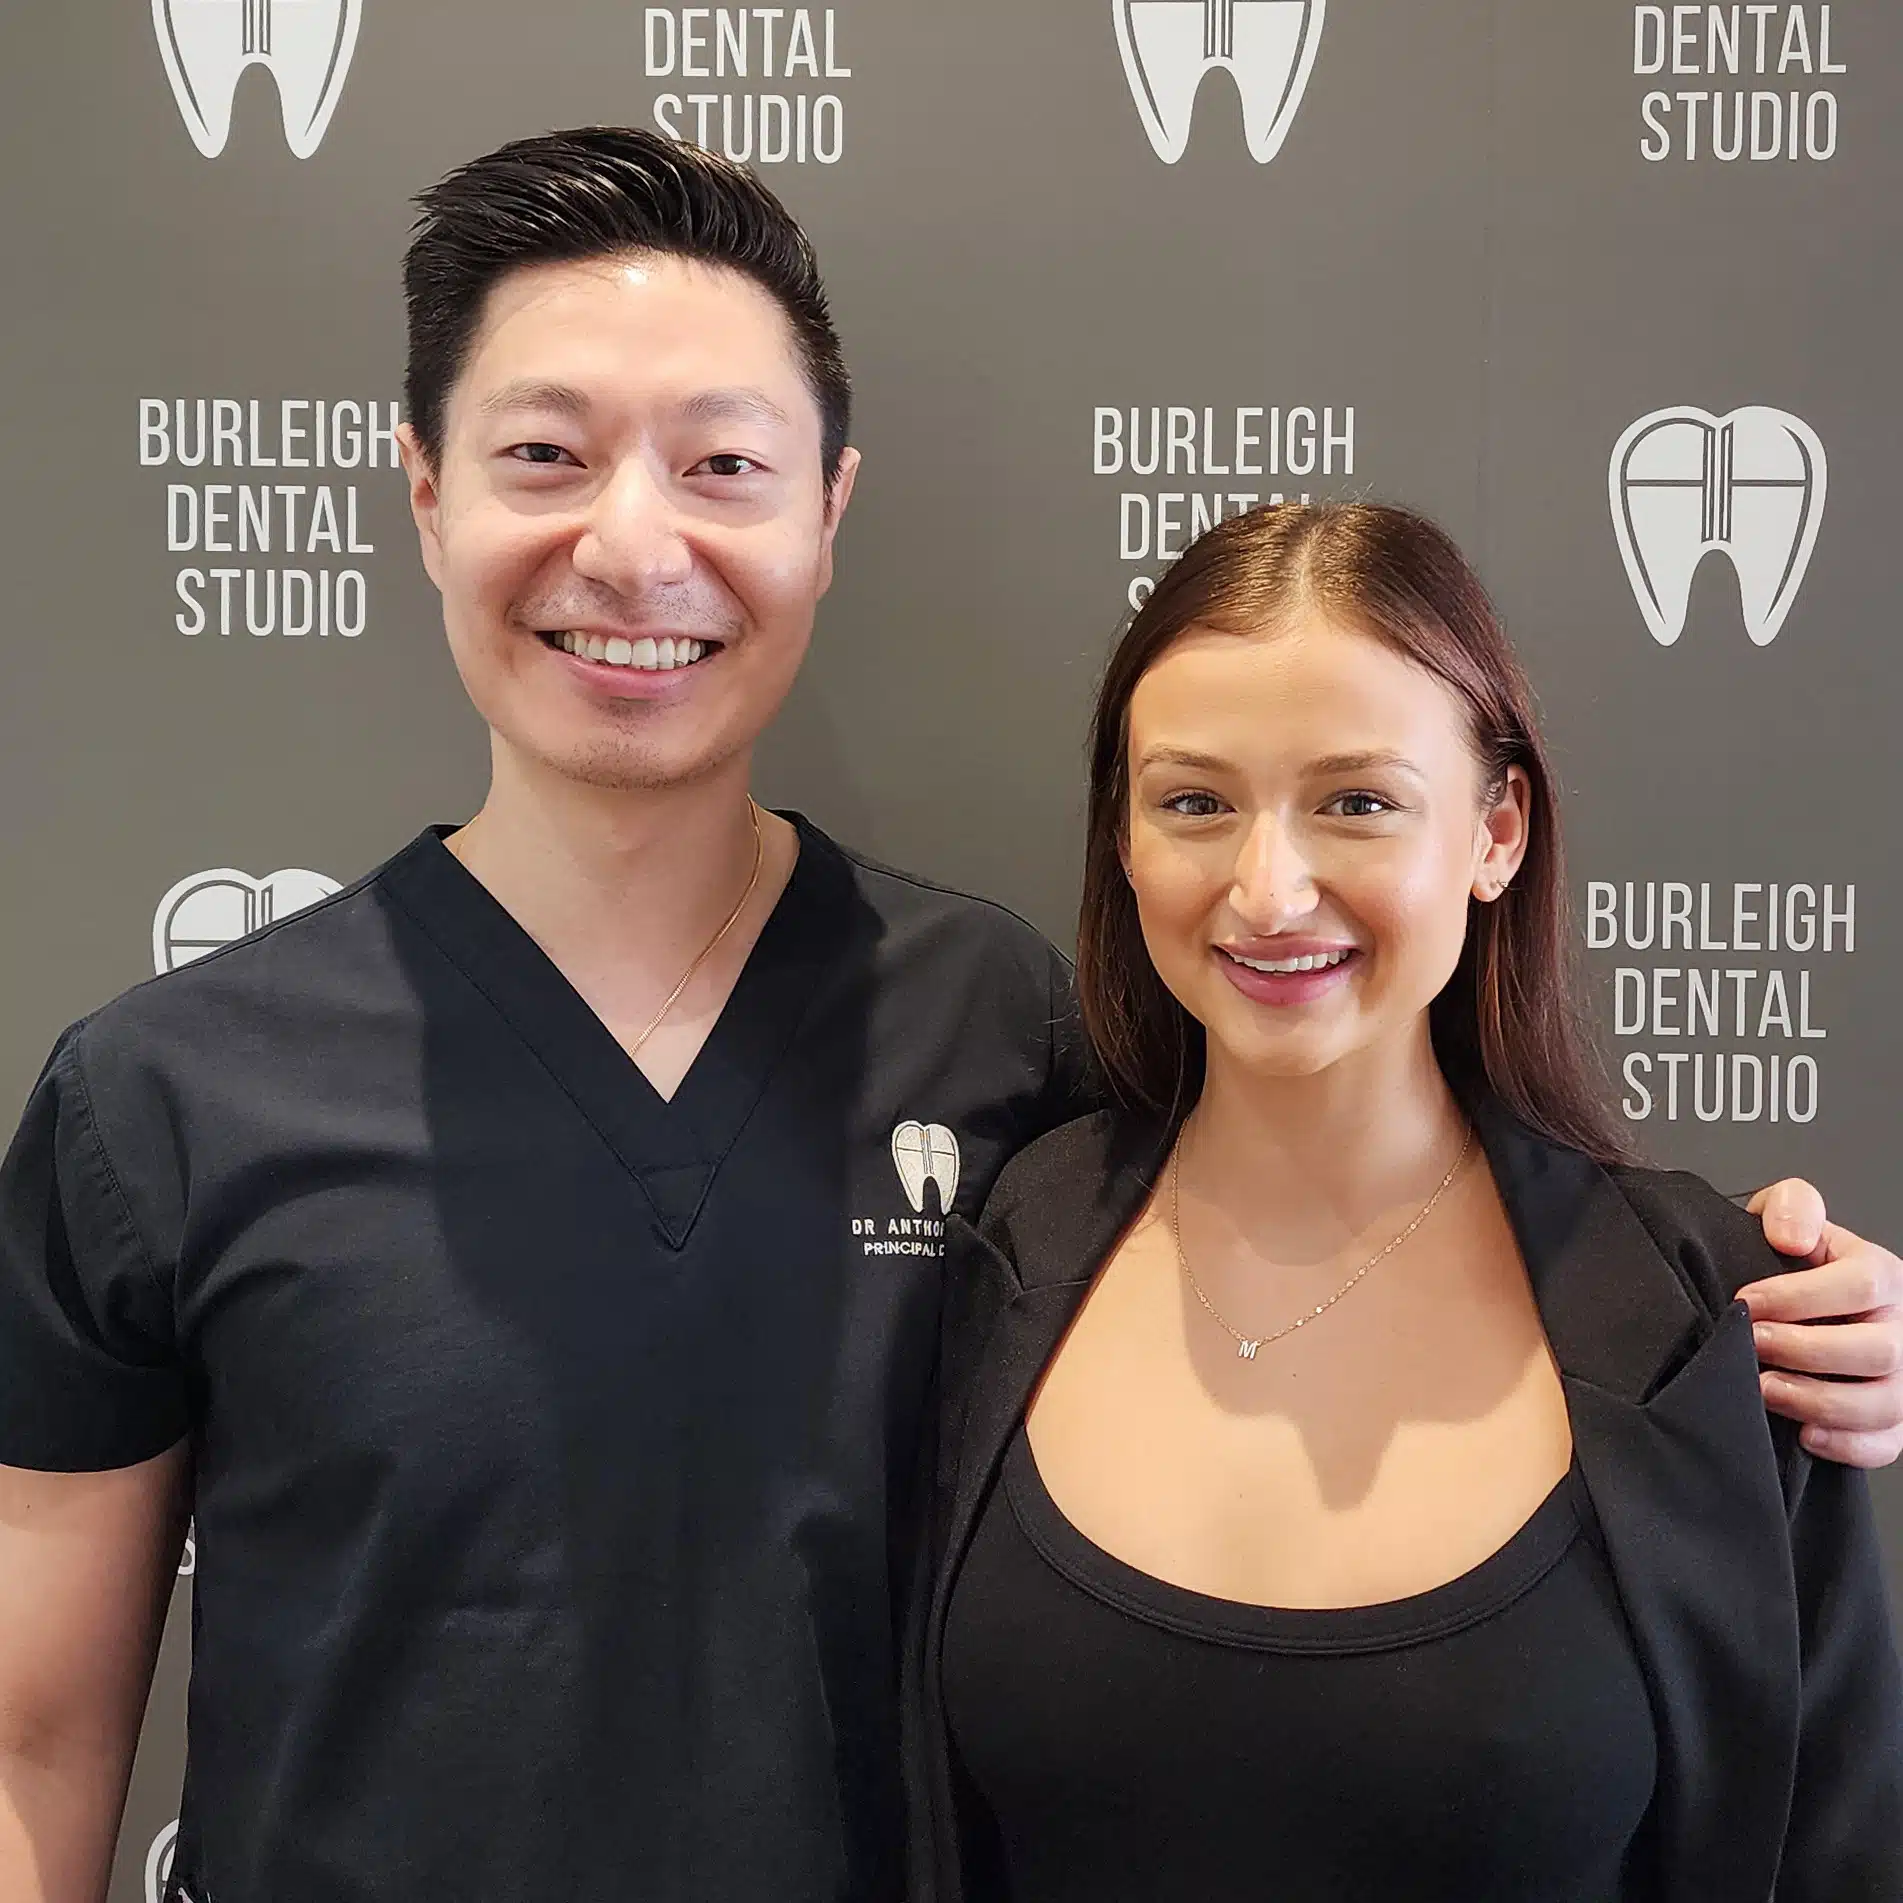 Happy Client 21 — Dentist In Burleigh Heads, QLD